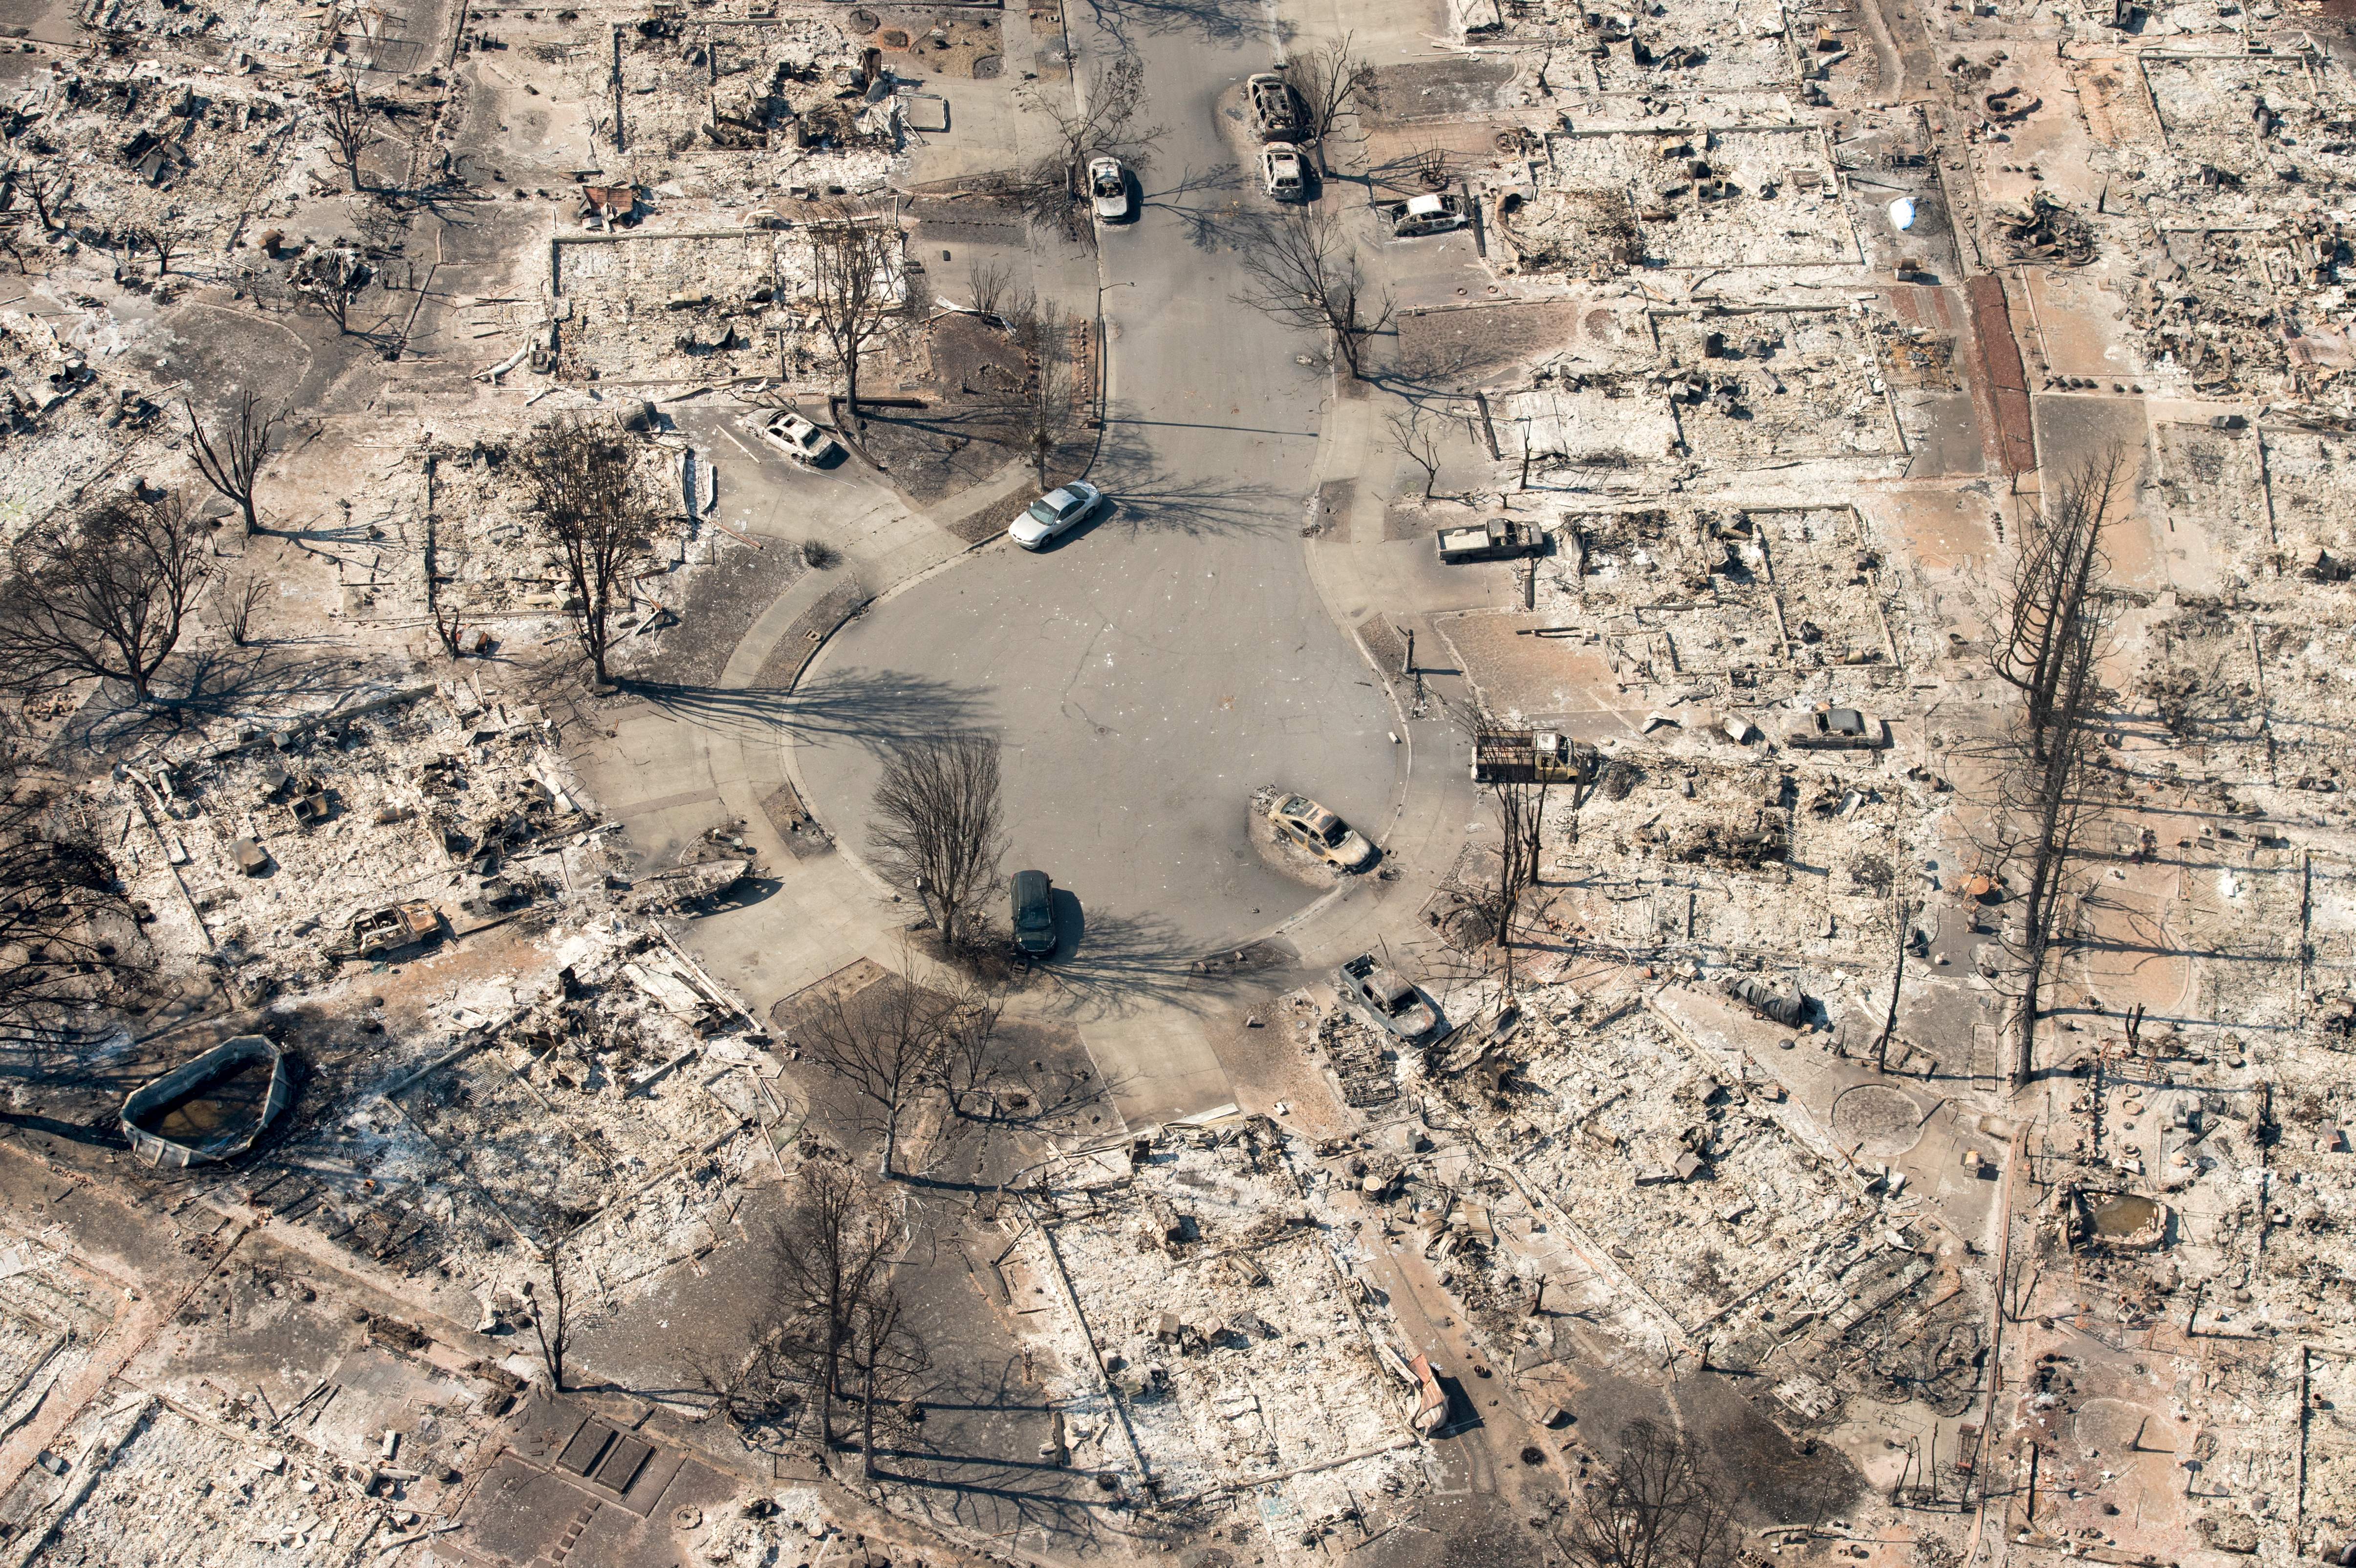 Aftermath of the California wildfires. (Josh Edelson/AFP/Getty Images)